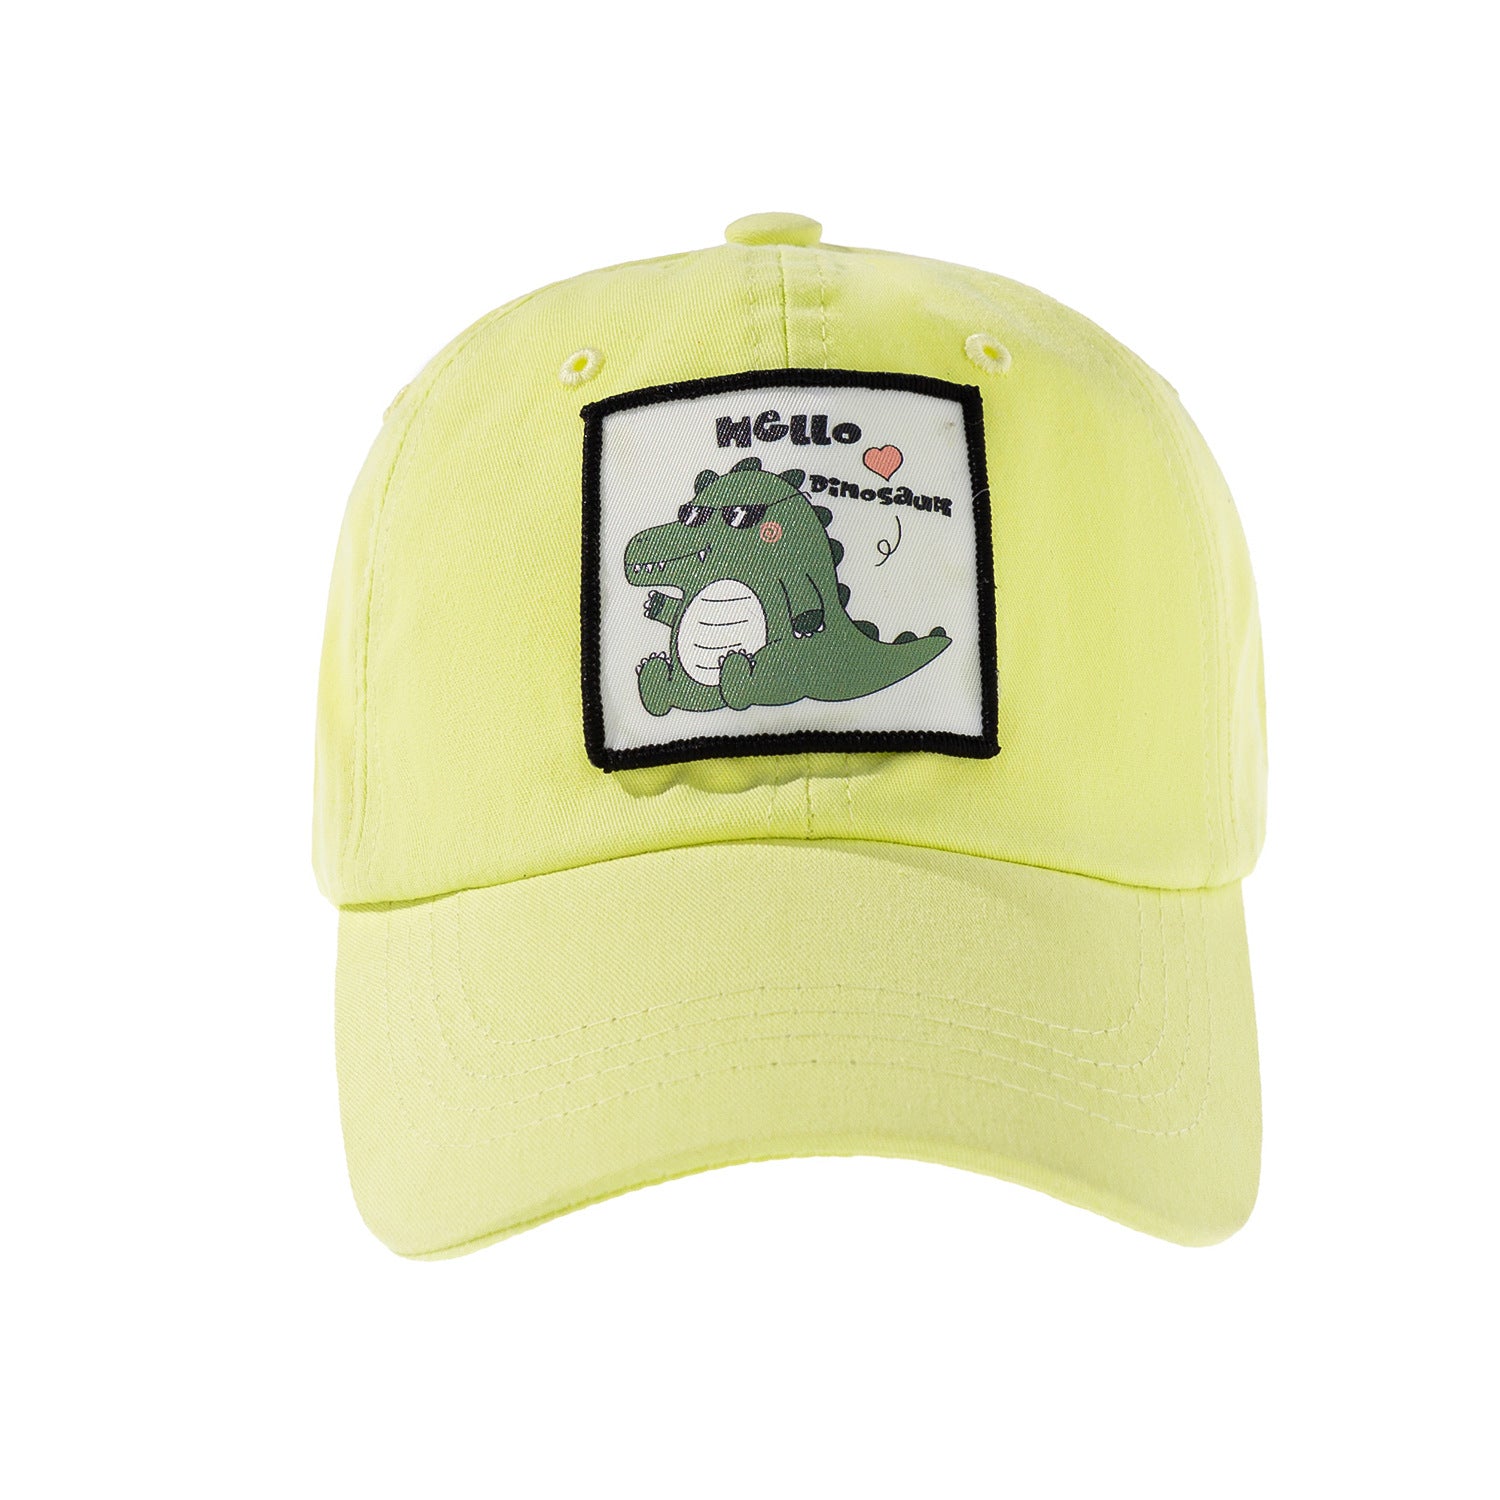 Boys And Girls Hats Cartoon Patch Casual Adjustable Baseball Cap Sun Hat Wholesale Childrens Hats